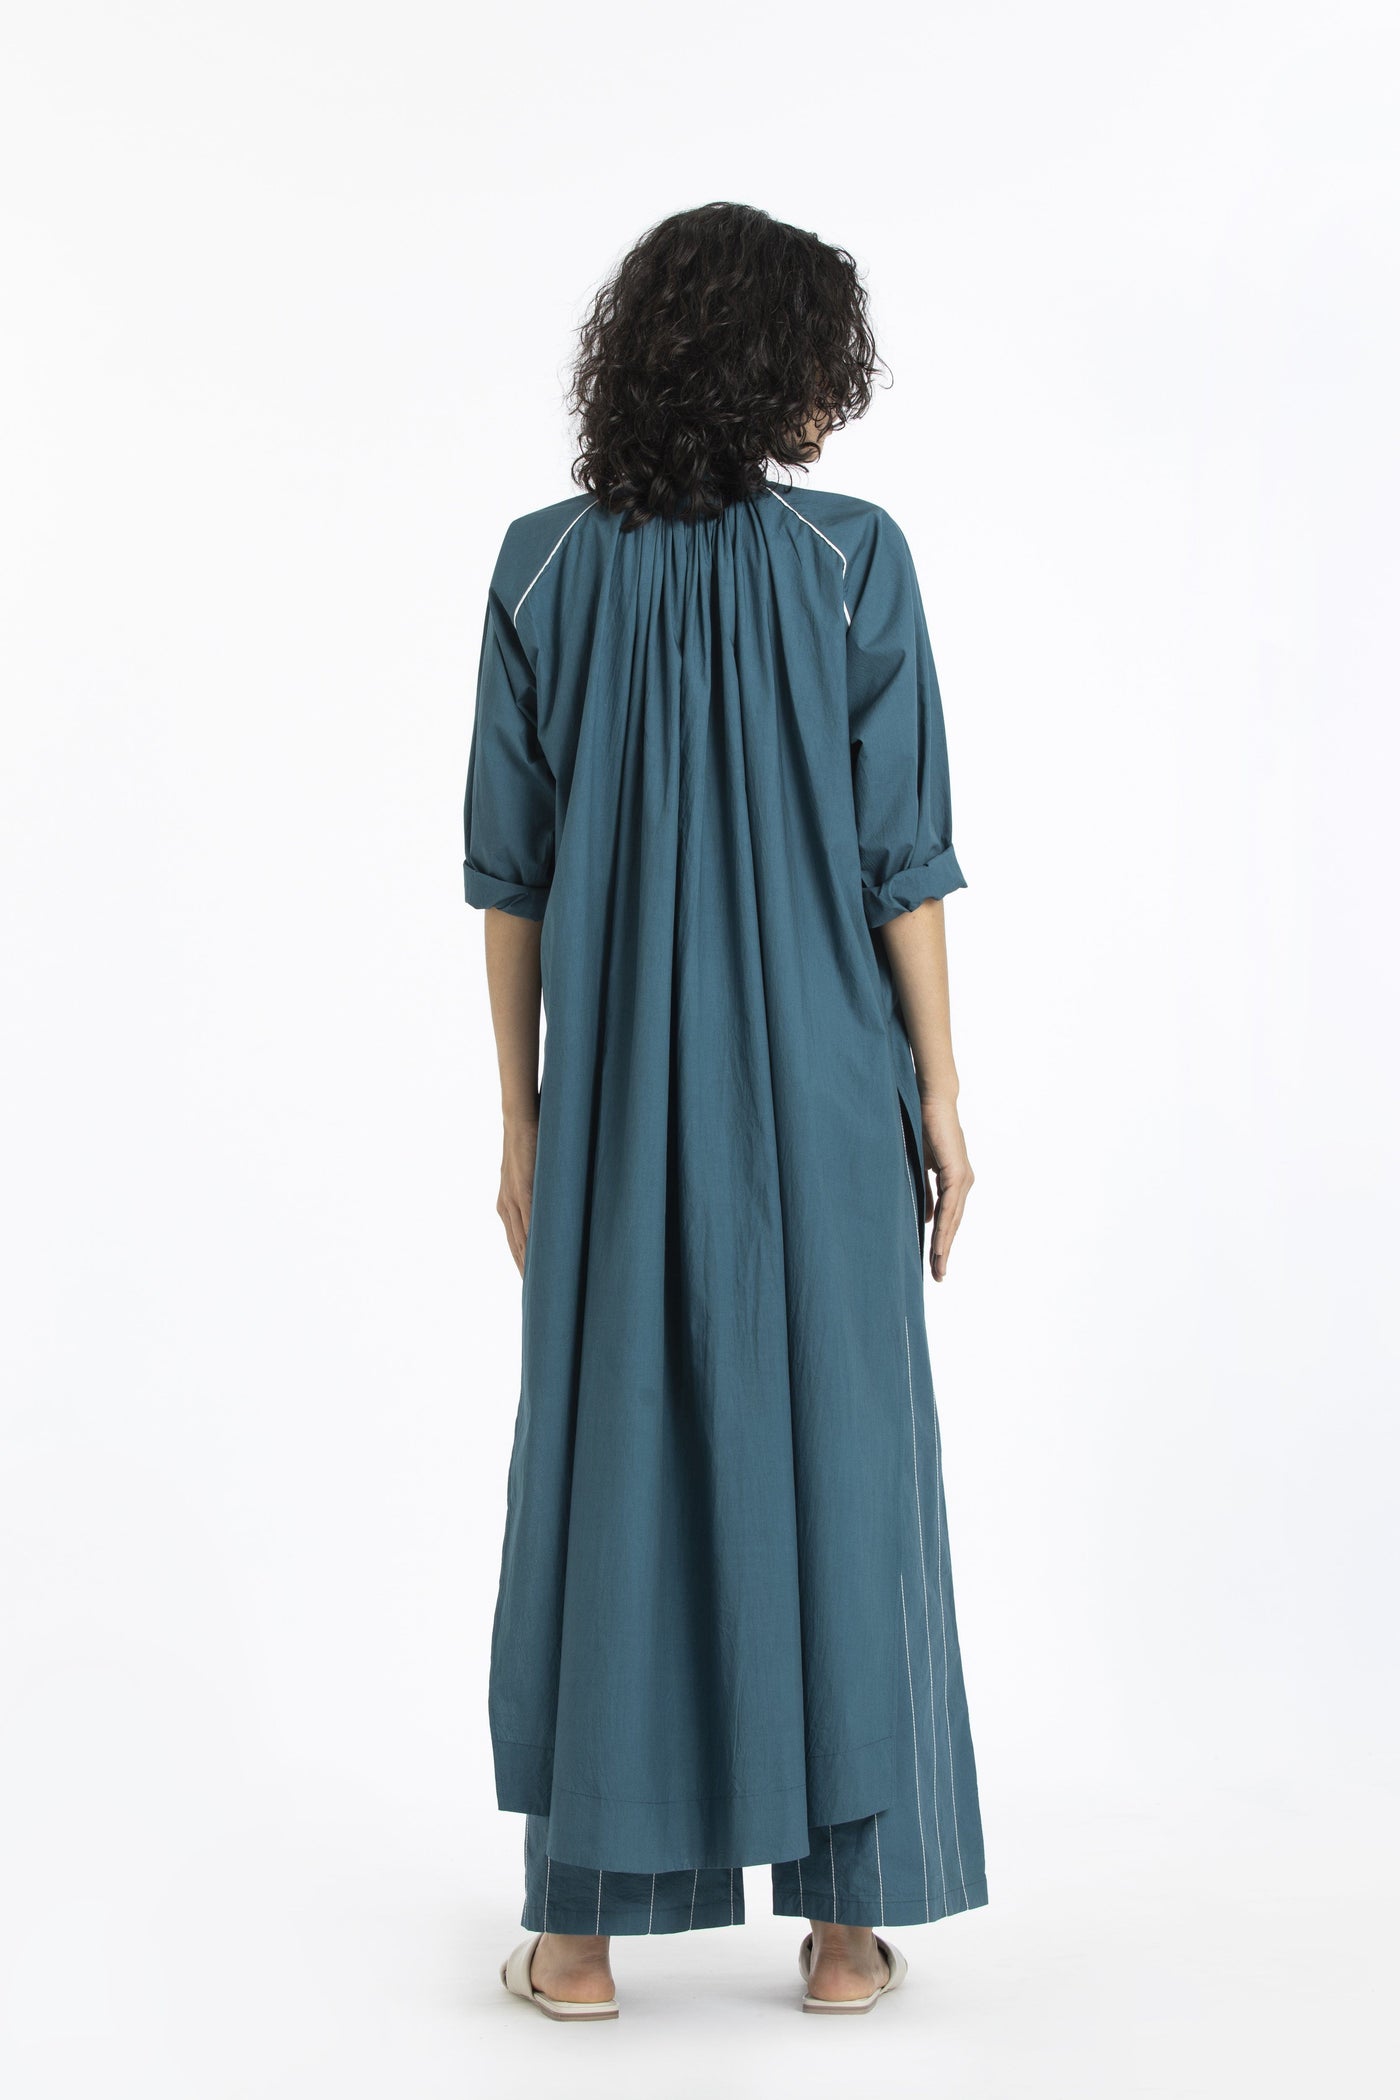 Gather neck shirt co-ord teal Co-ords THREE